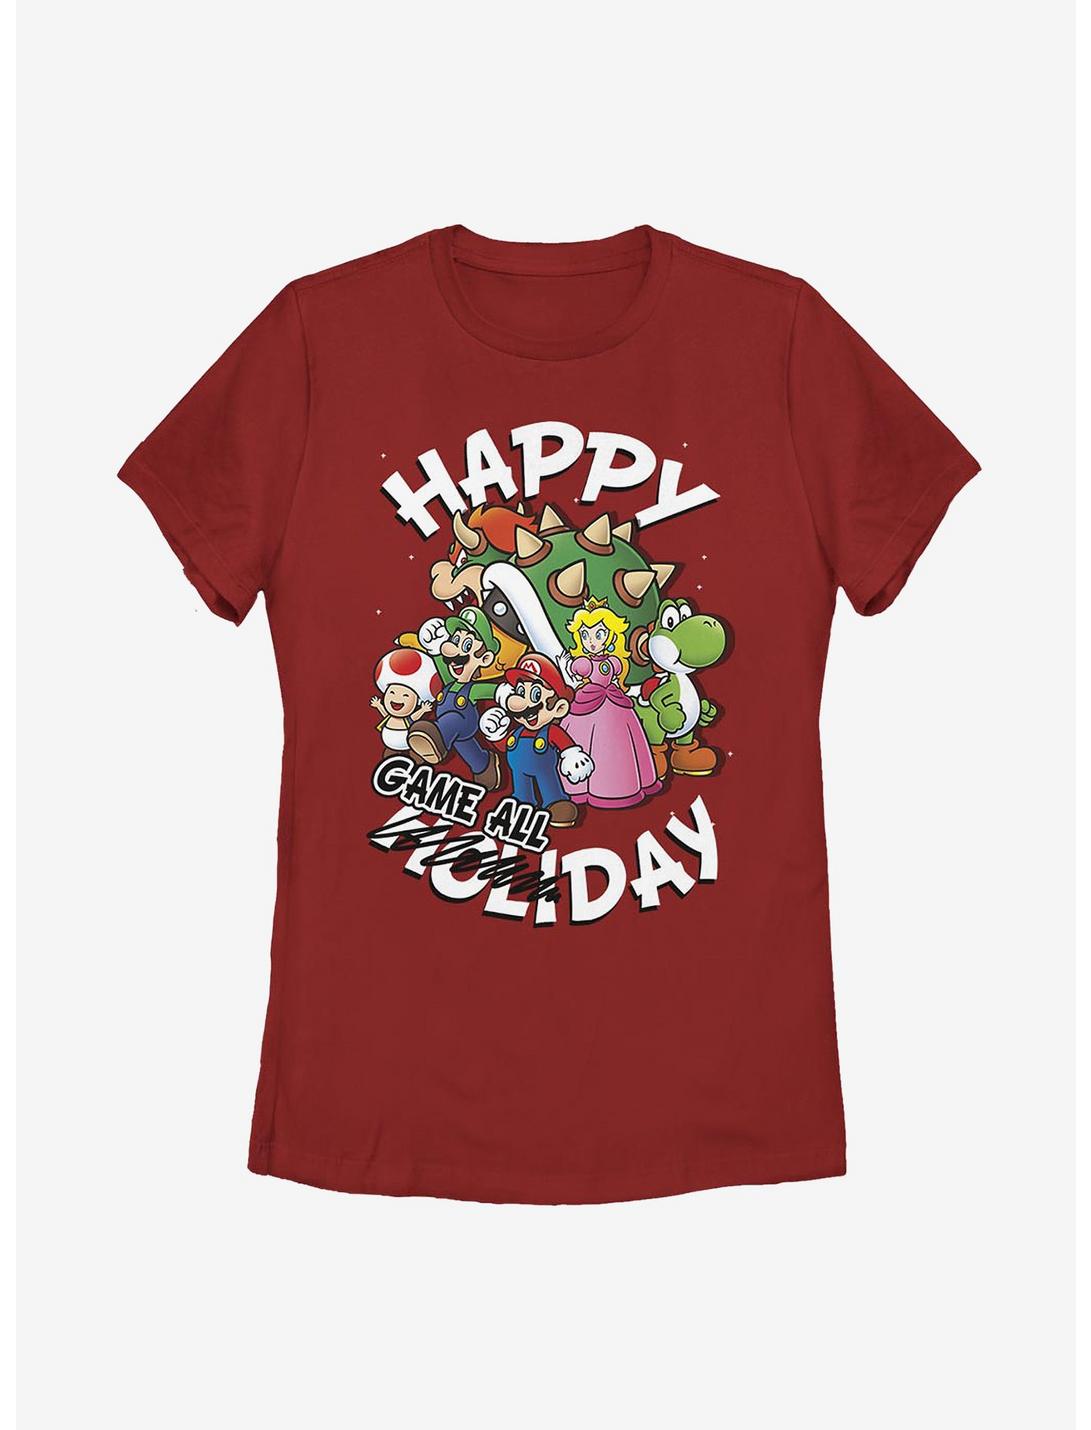 Super Mario Happy Game Day Womens T-Shirt, RED, hi-res